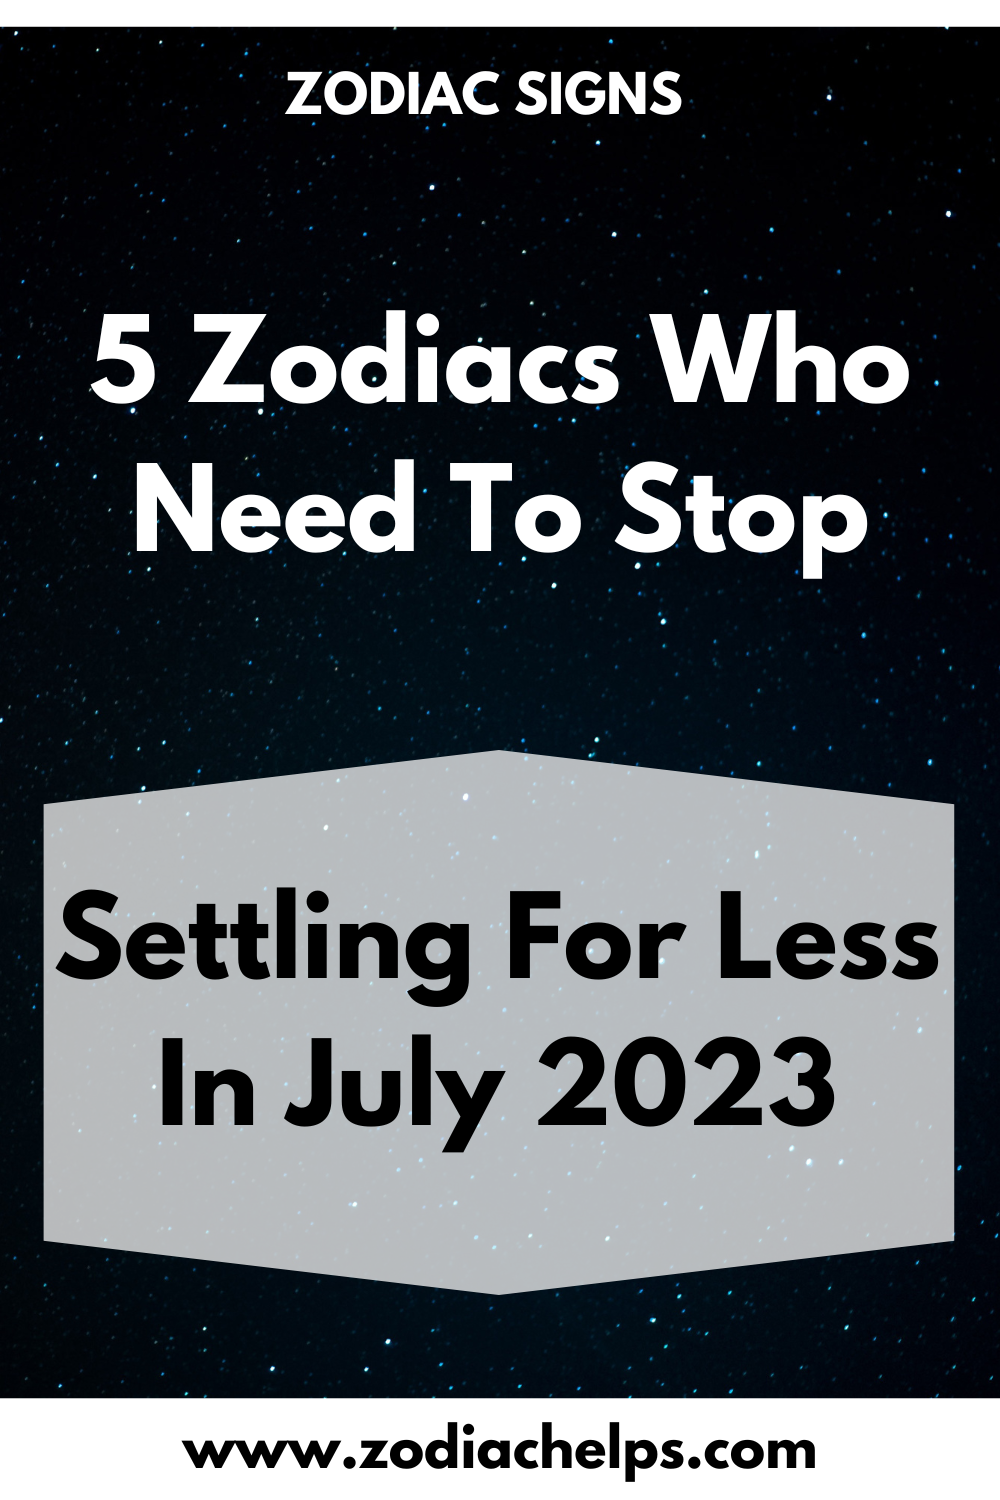 5 Zodiacs Who Need To Stop Settling For Less In July 2023